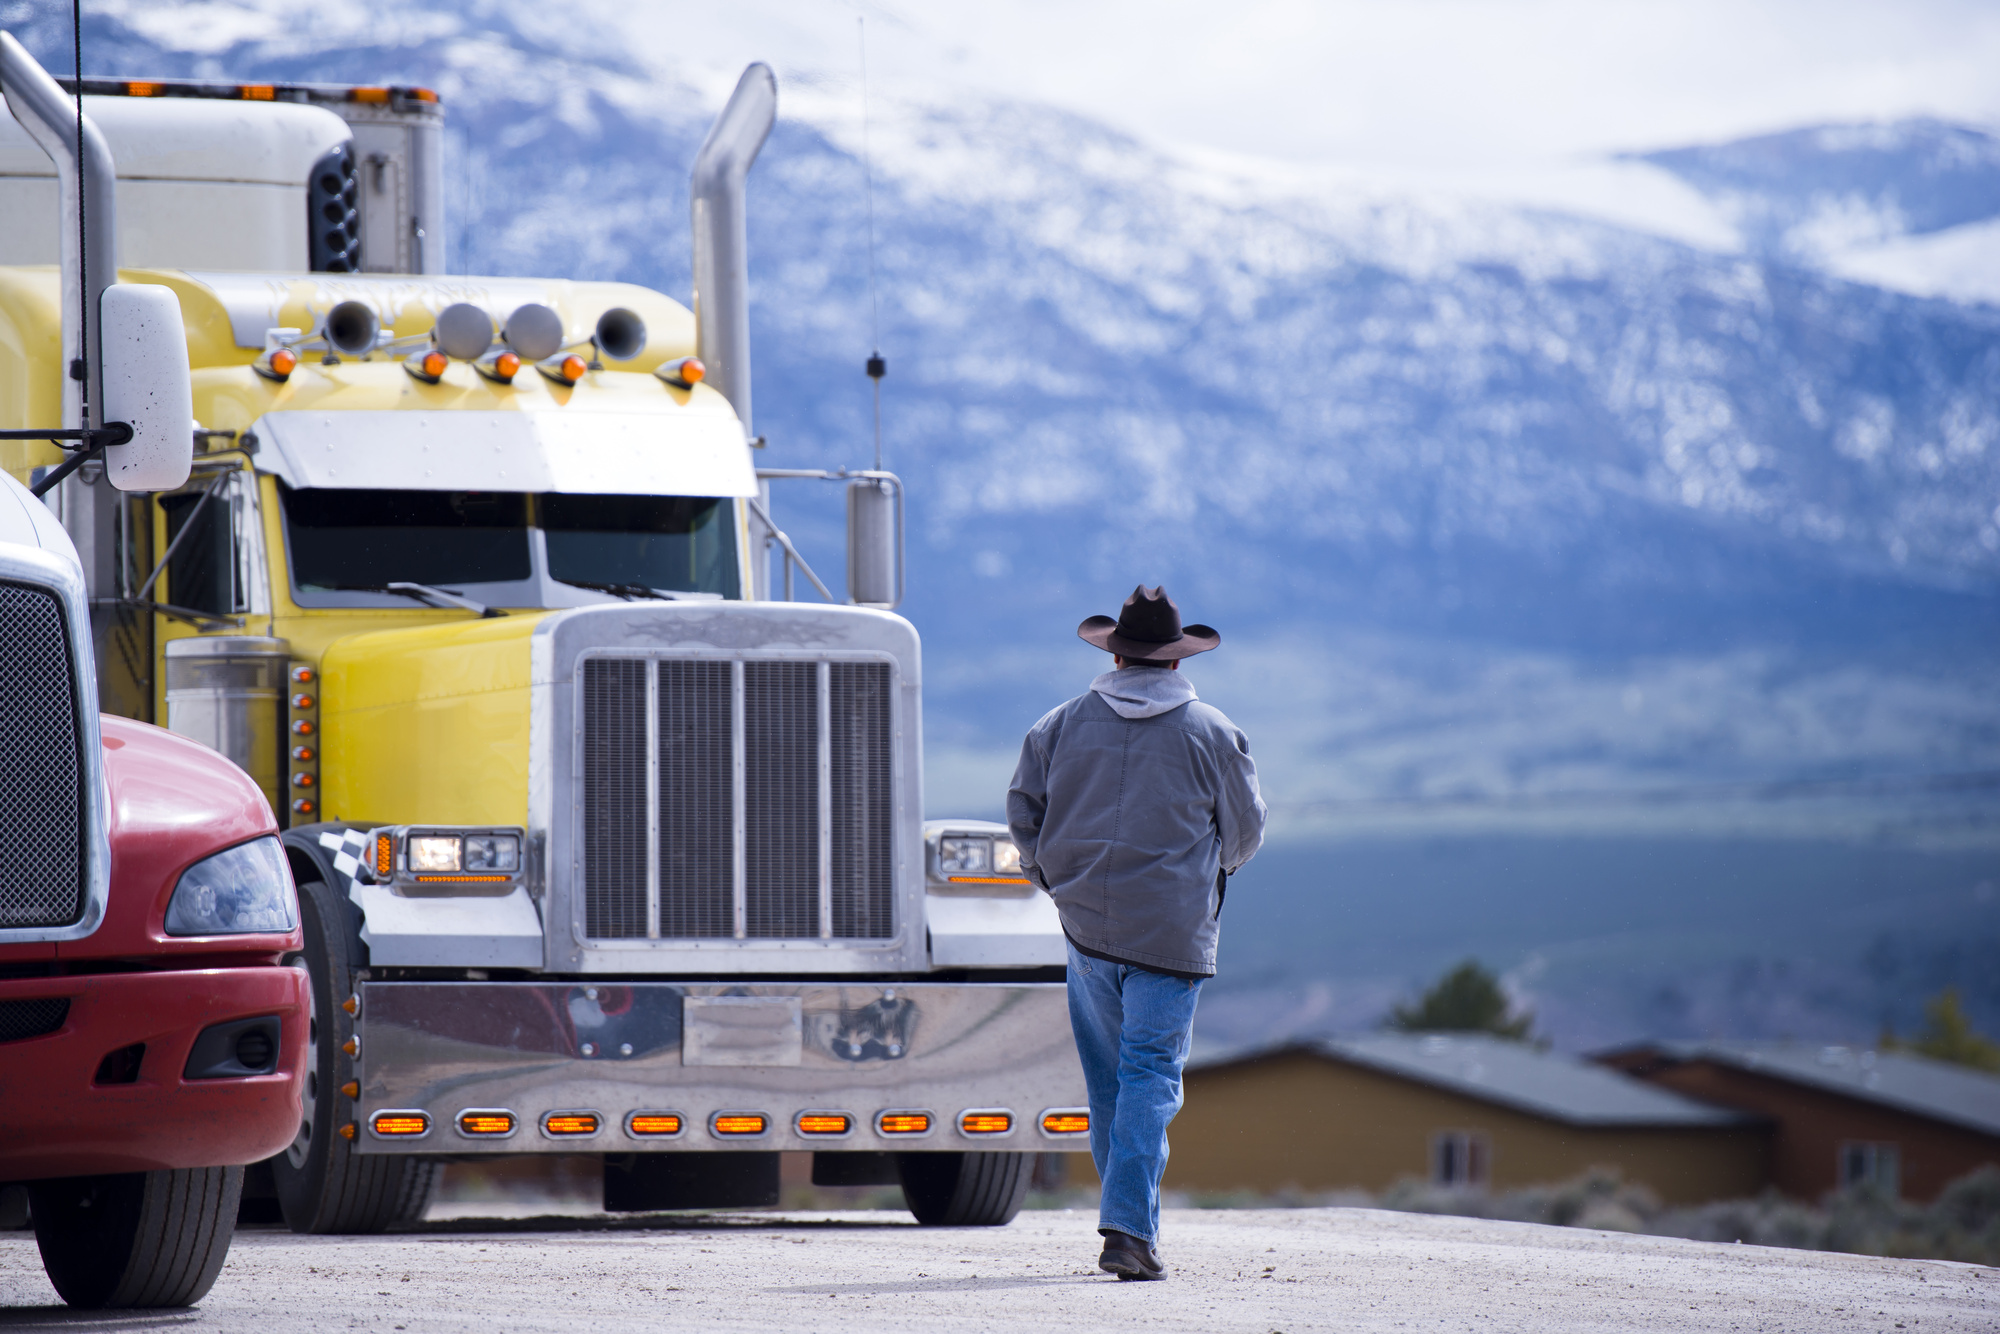 How Long Are Typical Work Shifts for Truck Drivers?